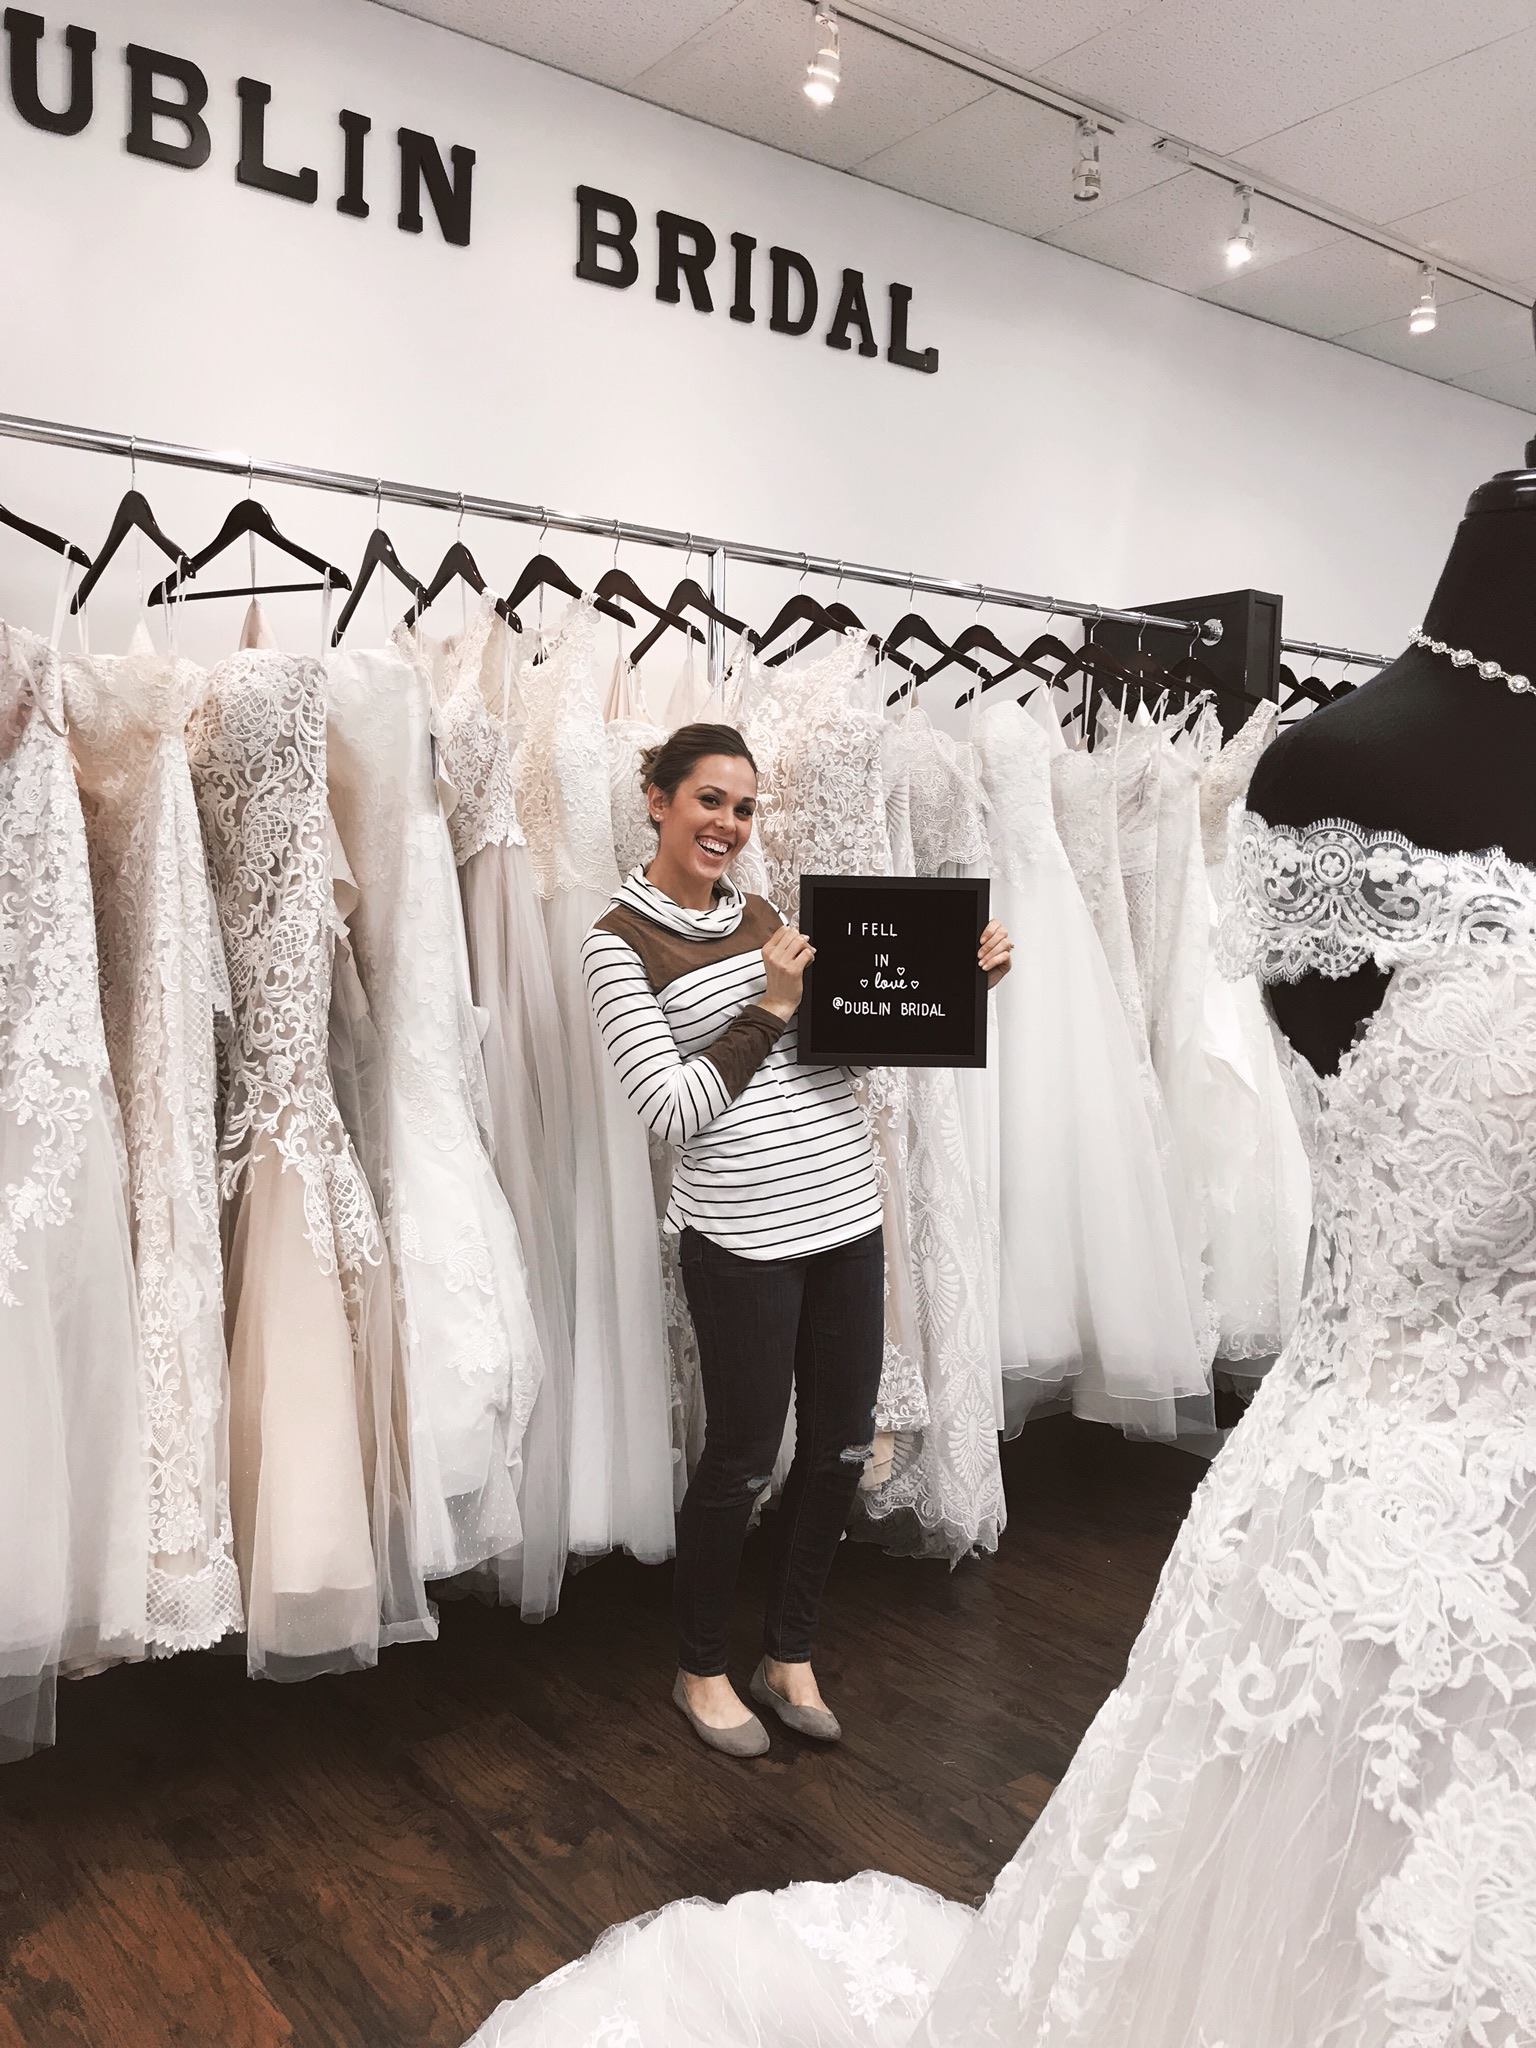 Choose the Best Wedding Dress for Your Inner Bride Image